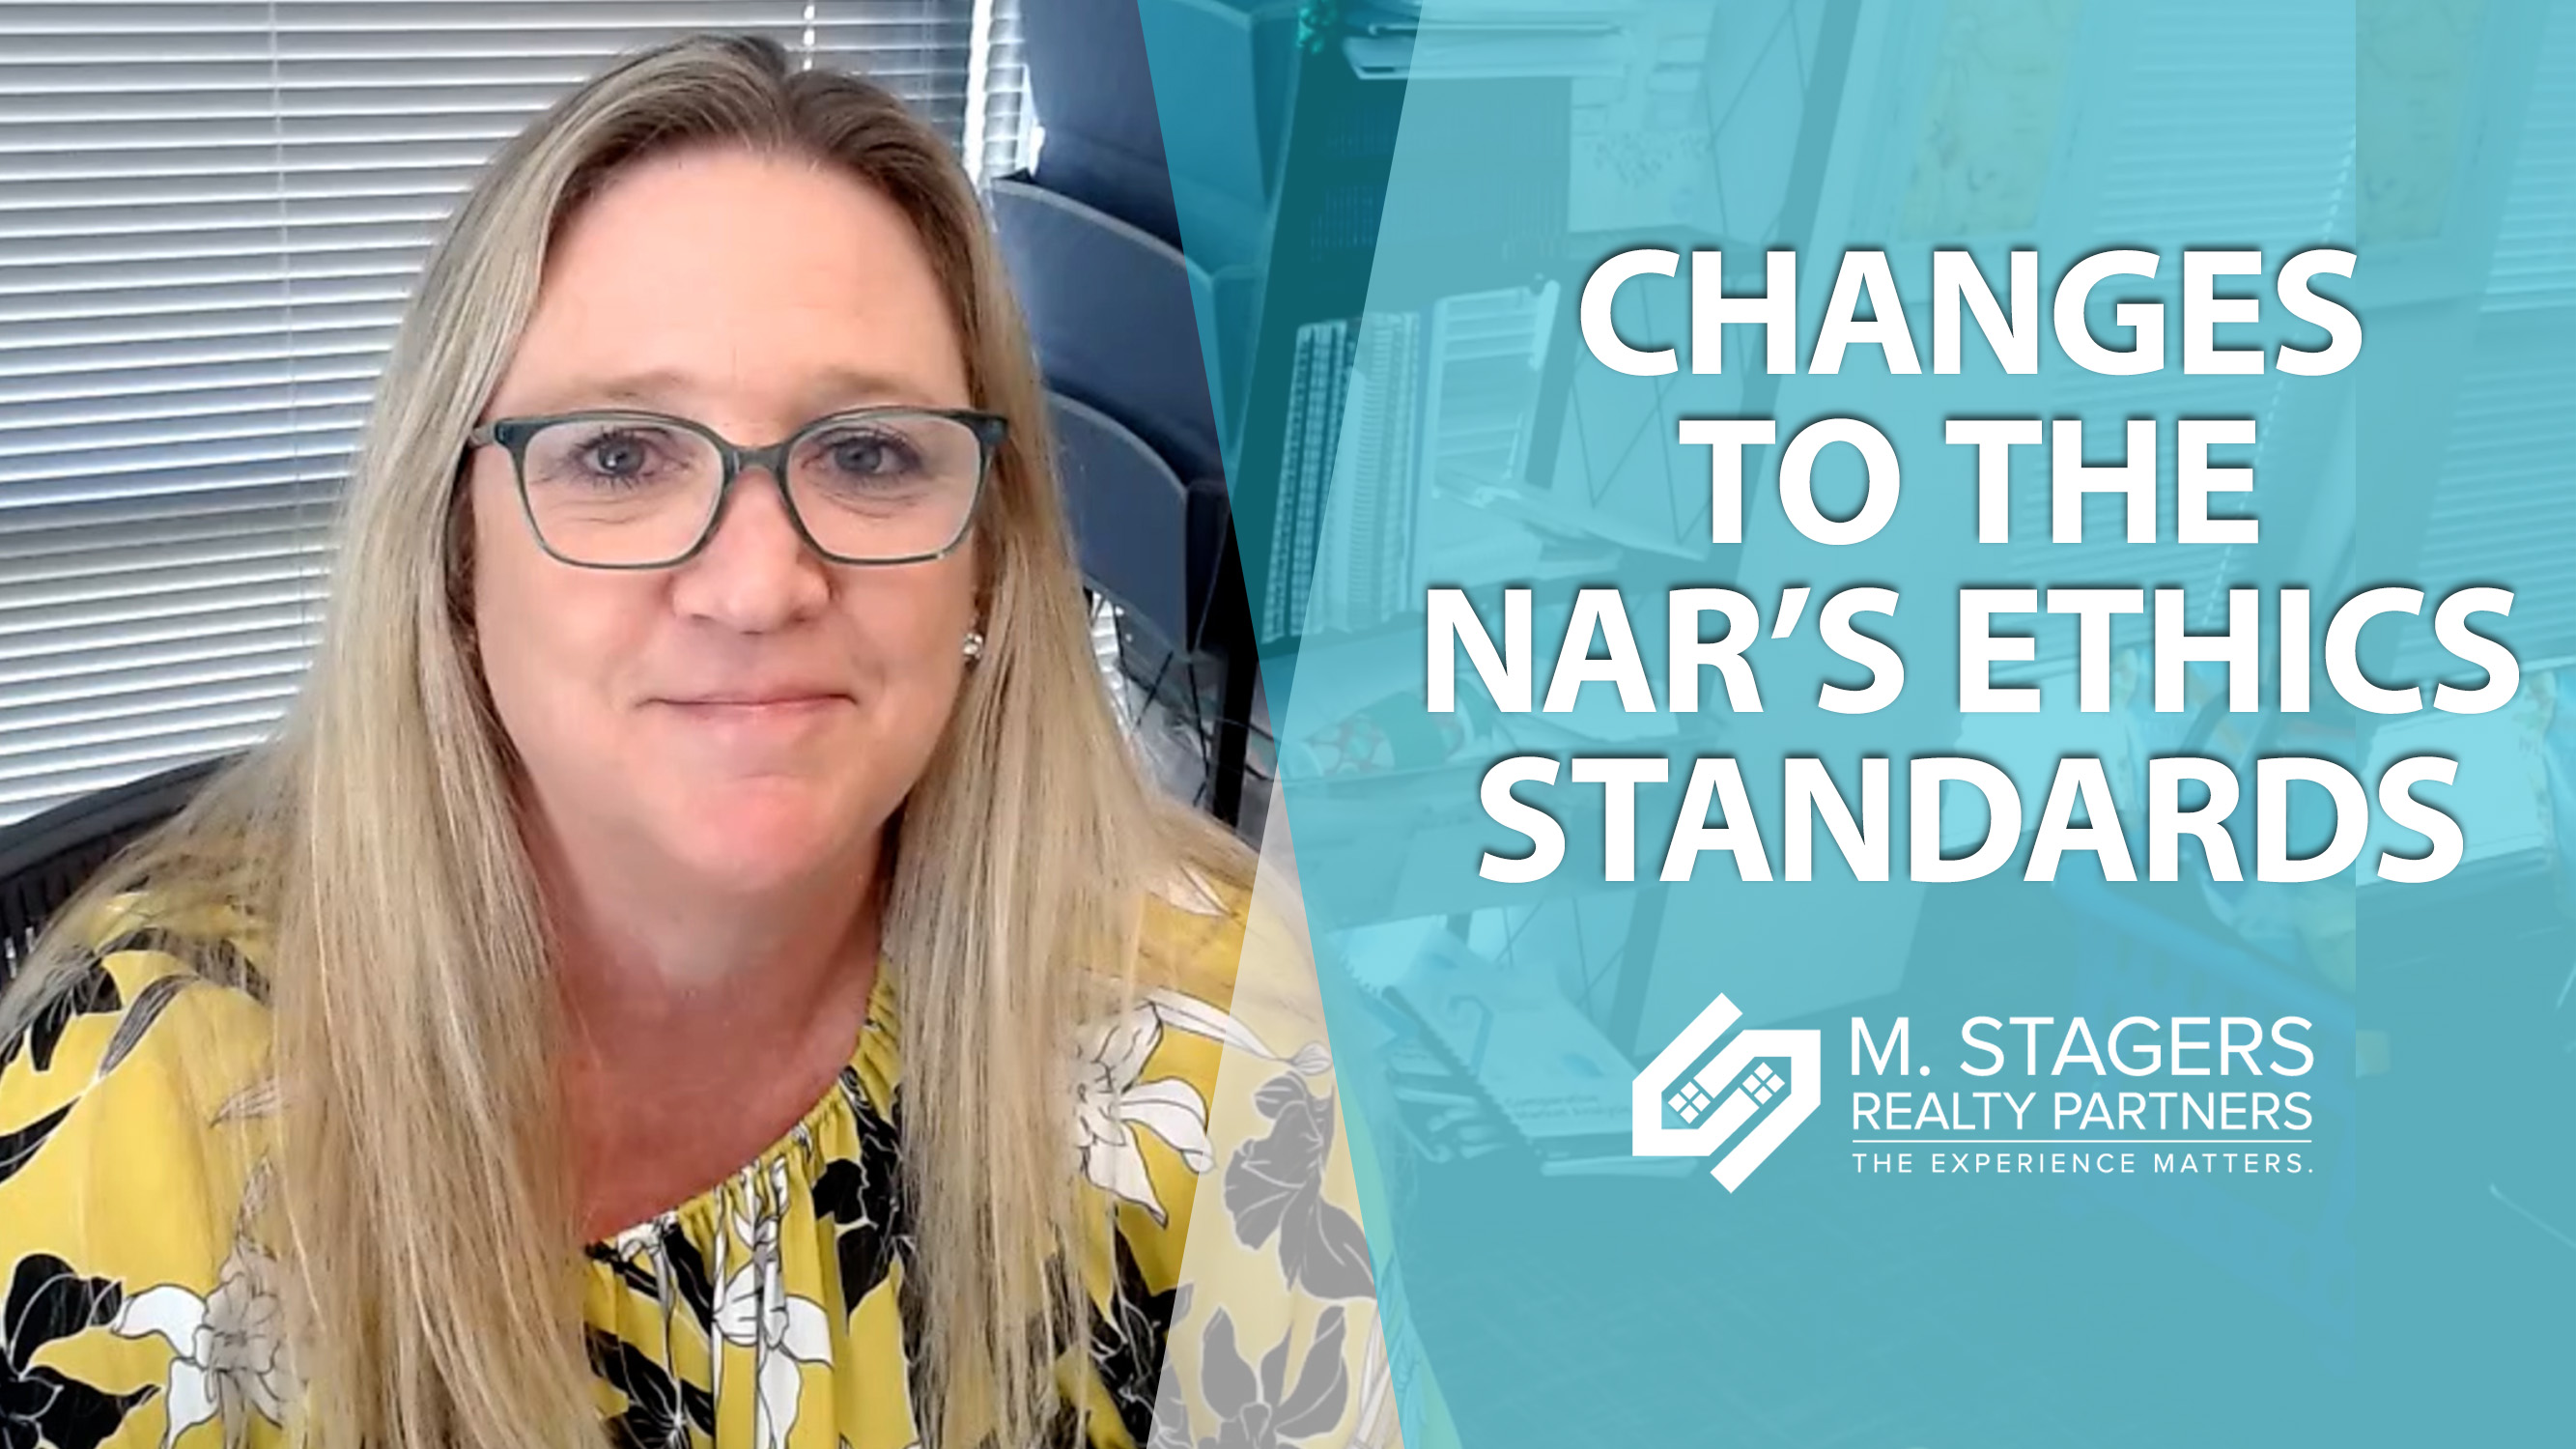 How Have The NAR’s Ethics Requirements Changed?